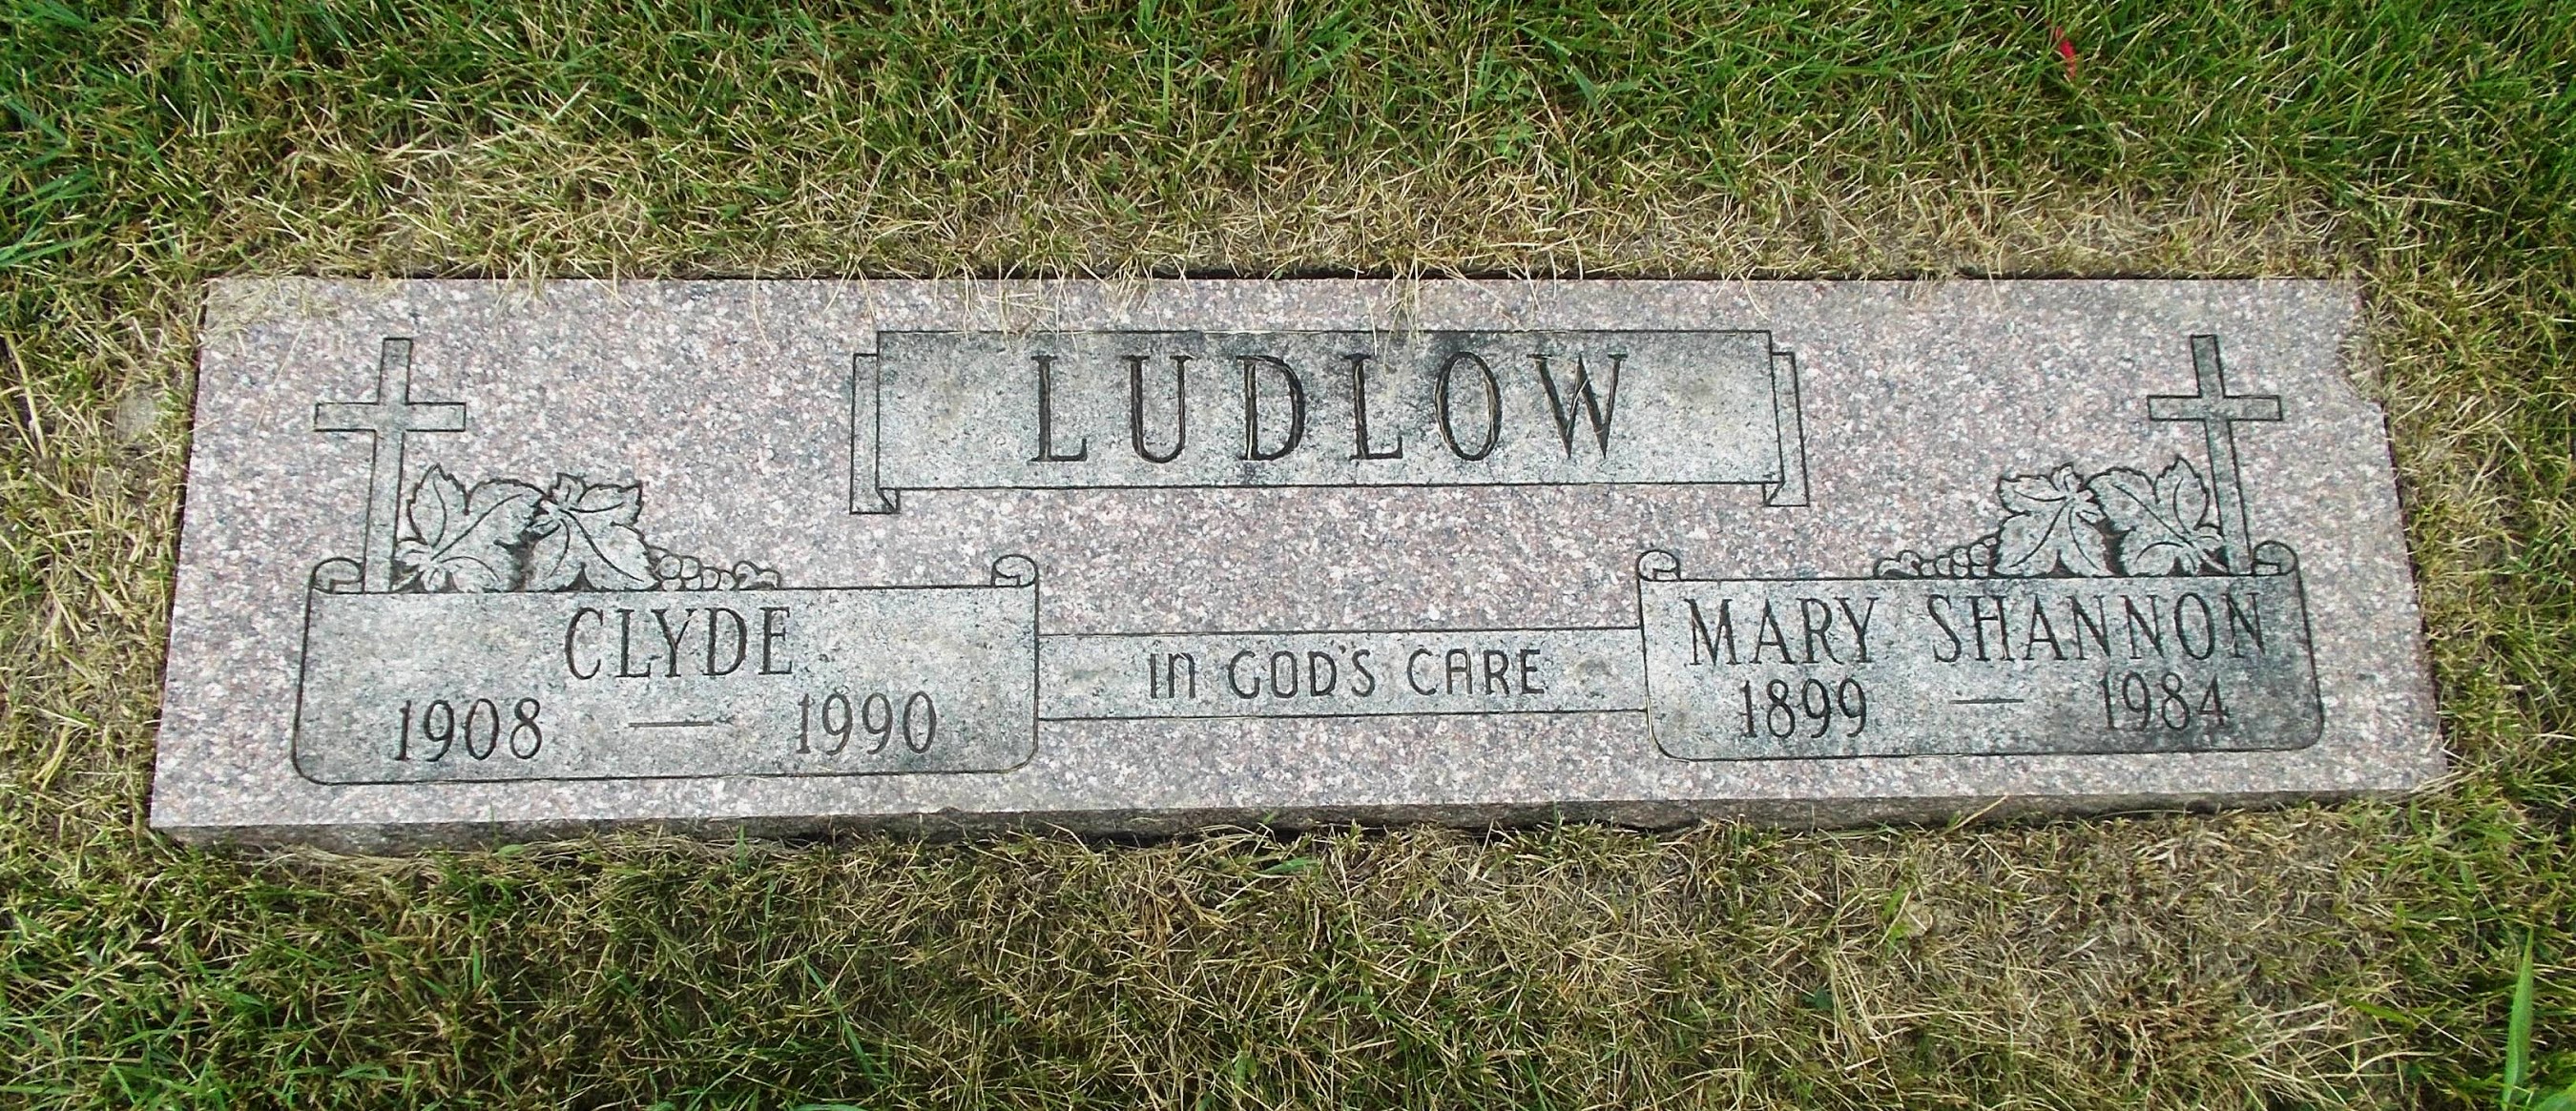 Mary Shannon Ludlow